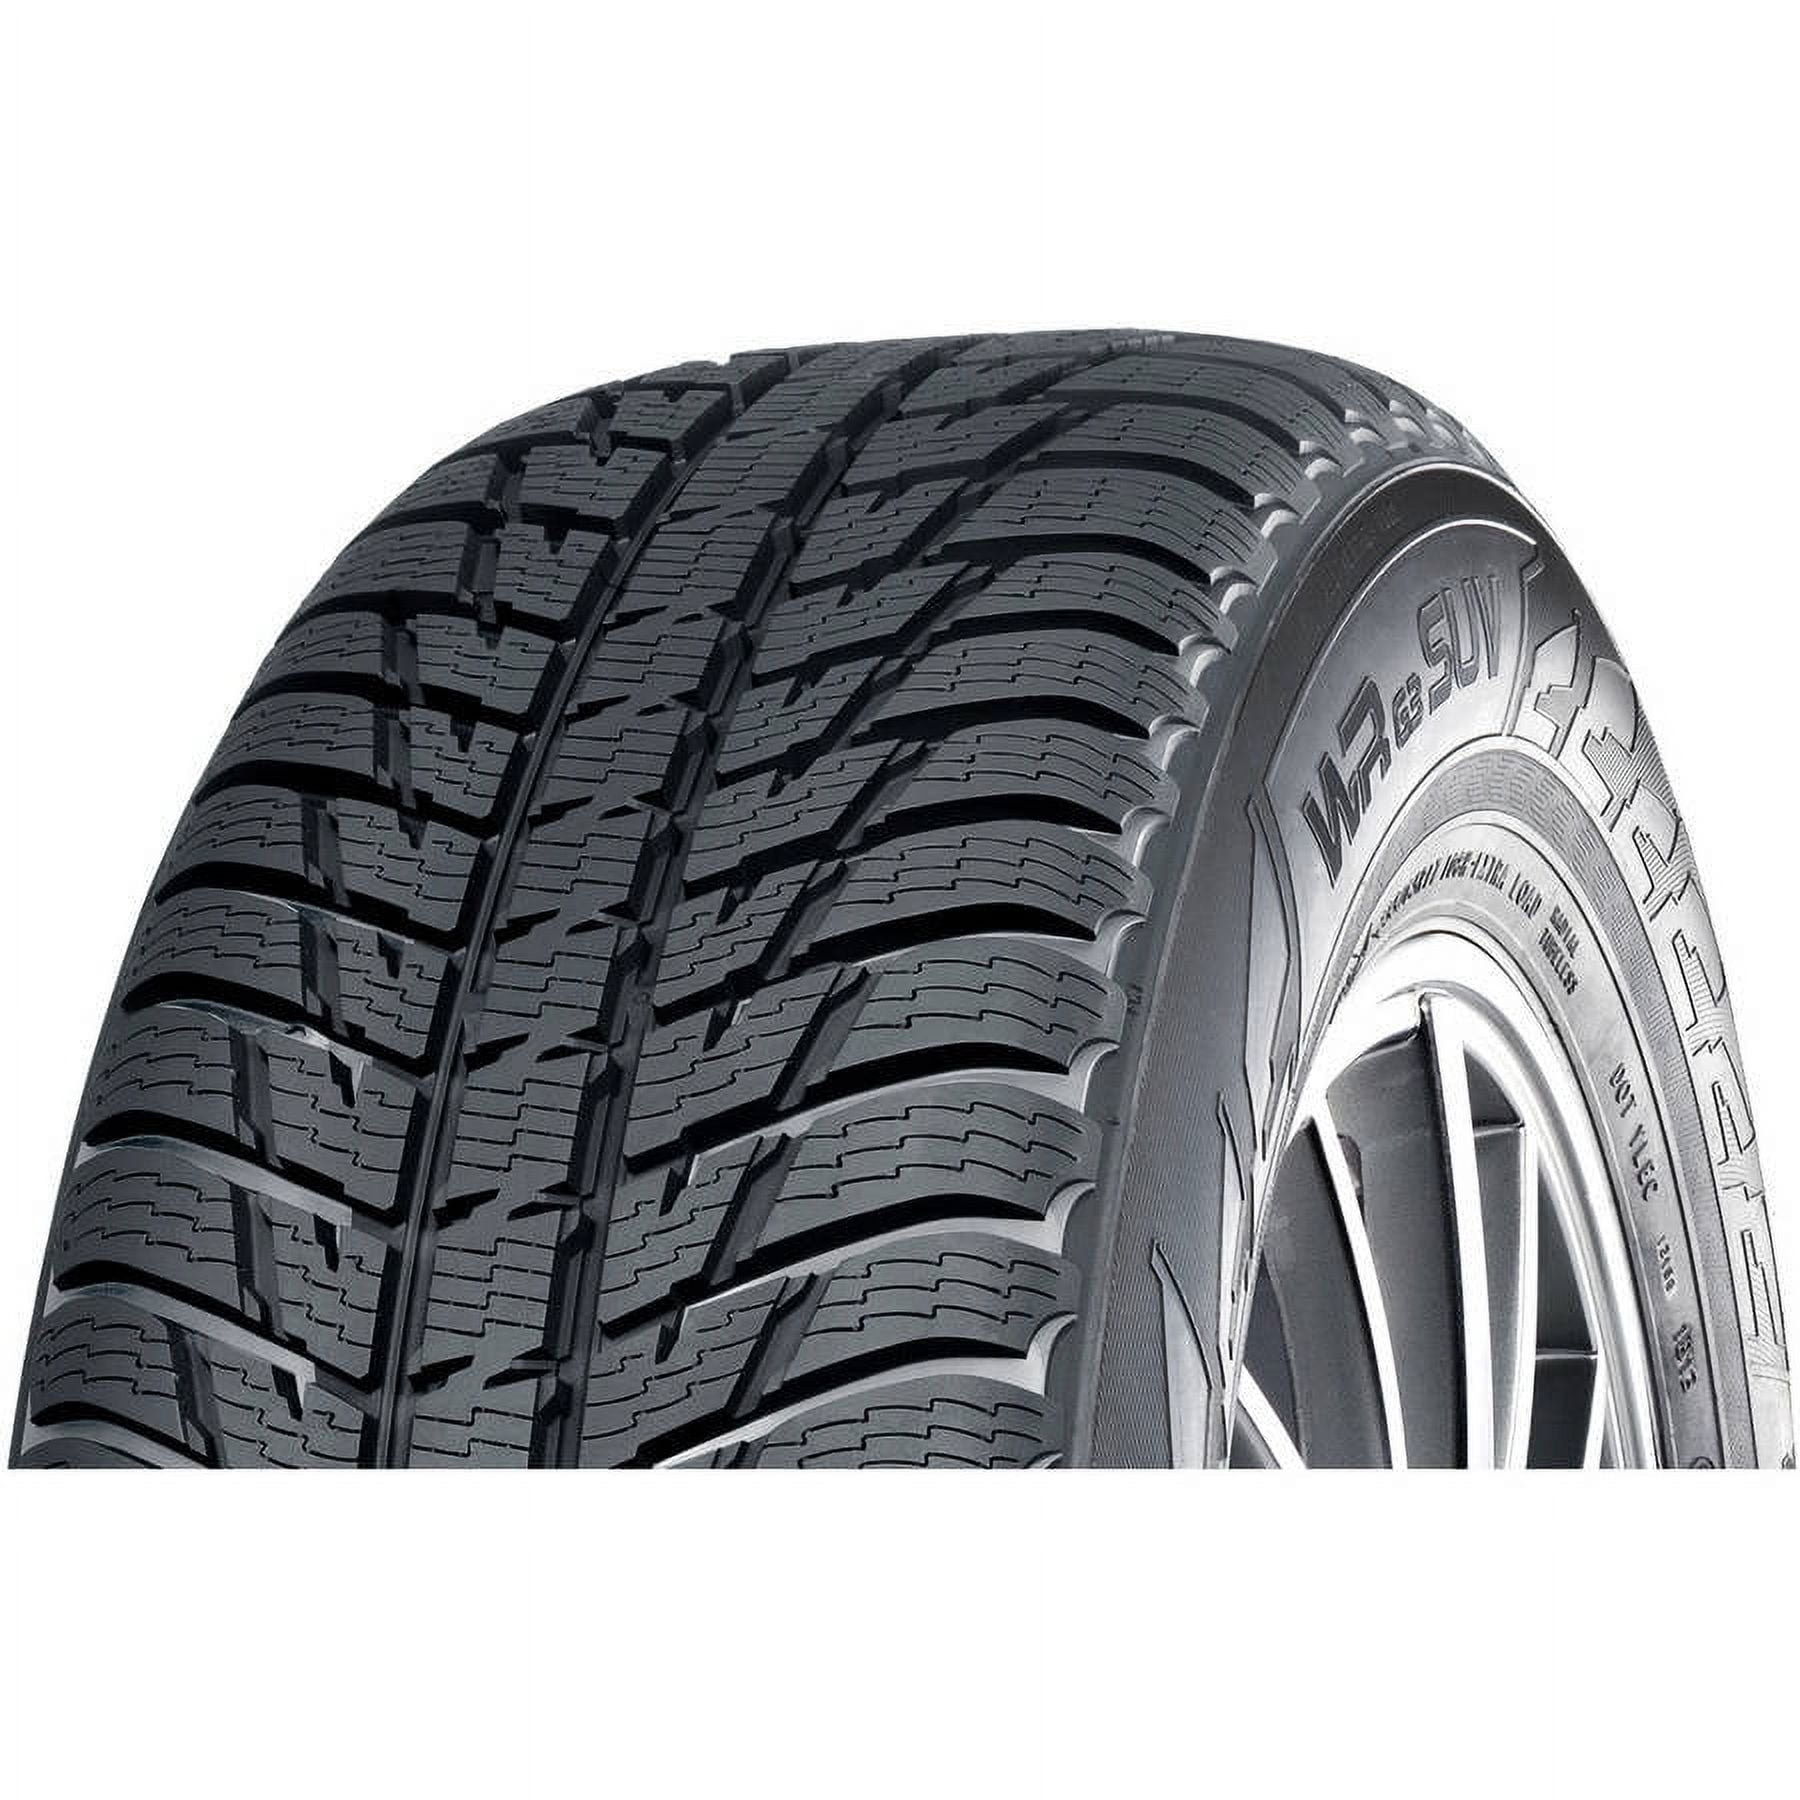 Nokian WRG3 SUV Forester 102 H North Renegade Tire Jeep Fits: Subaru 215/65R16 2009-13 X, 2017-22